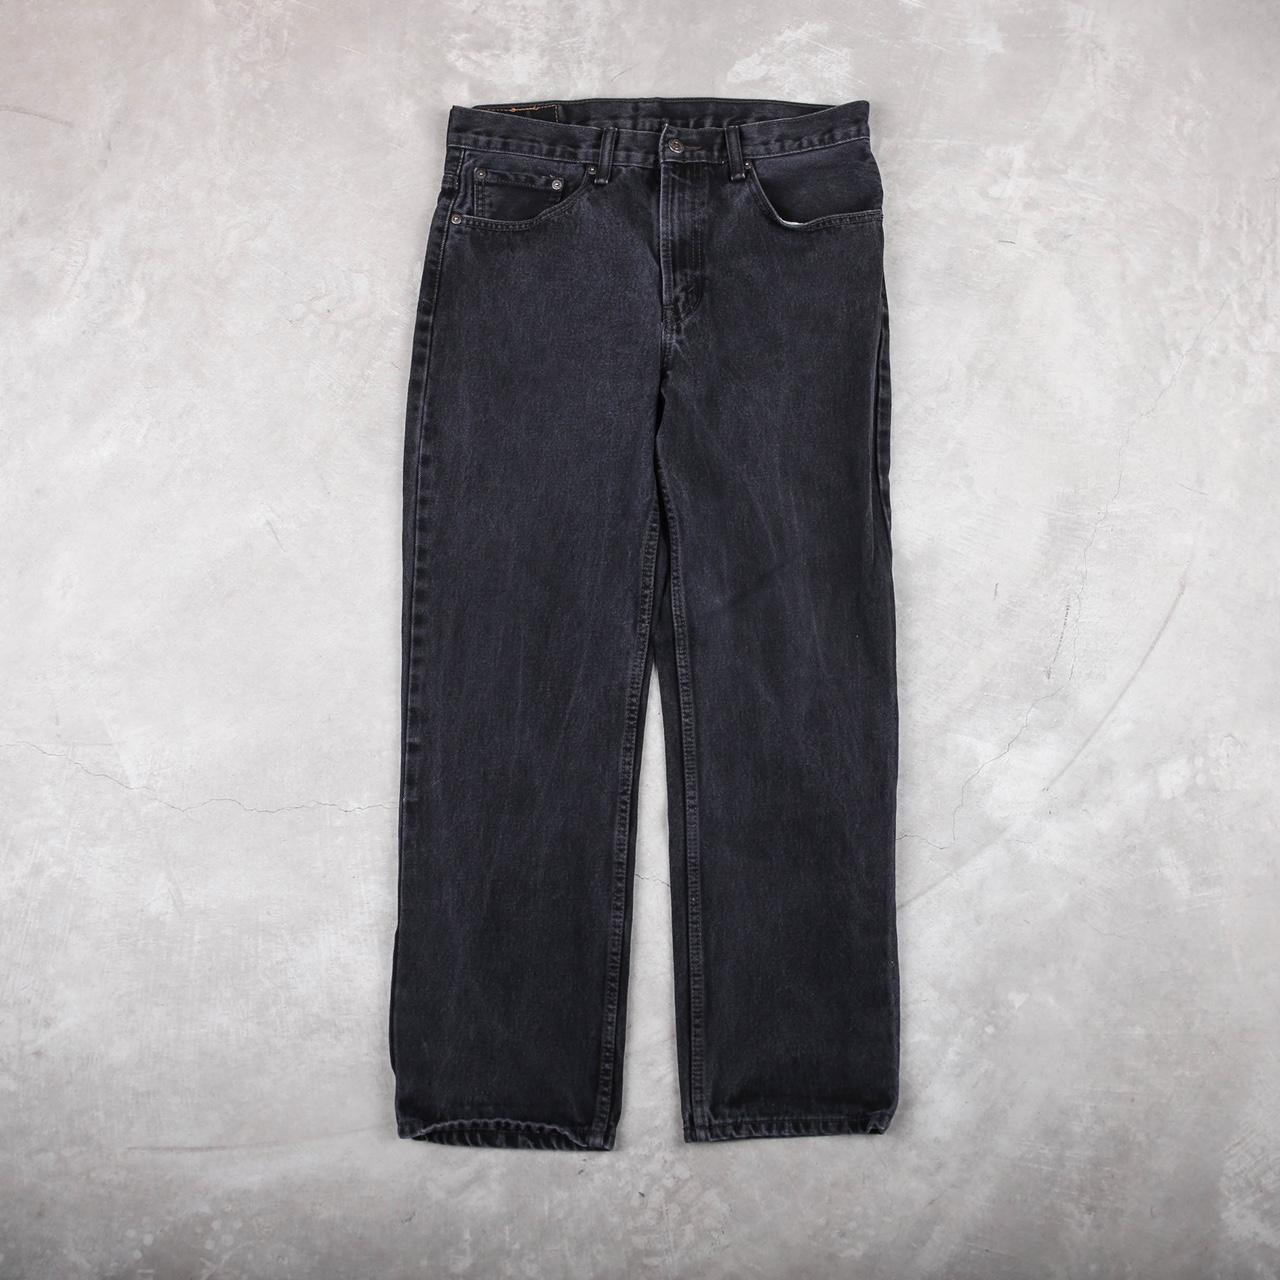 Vintage Levi’s jeans early 90s 516 pants with nice... - Depop